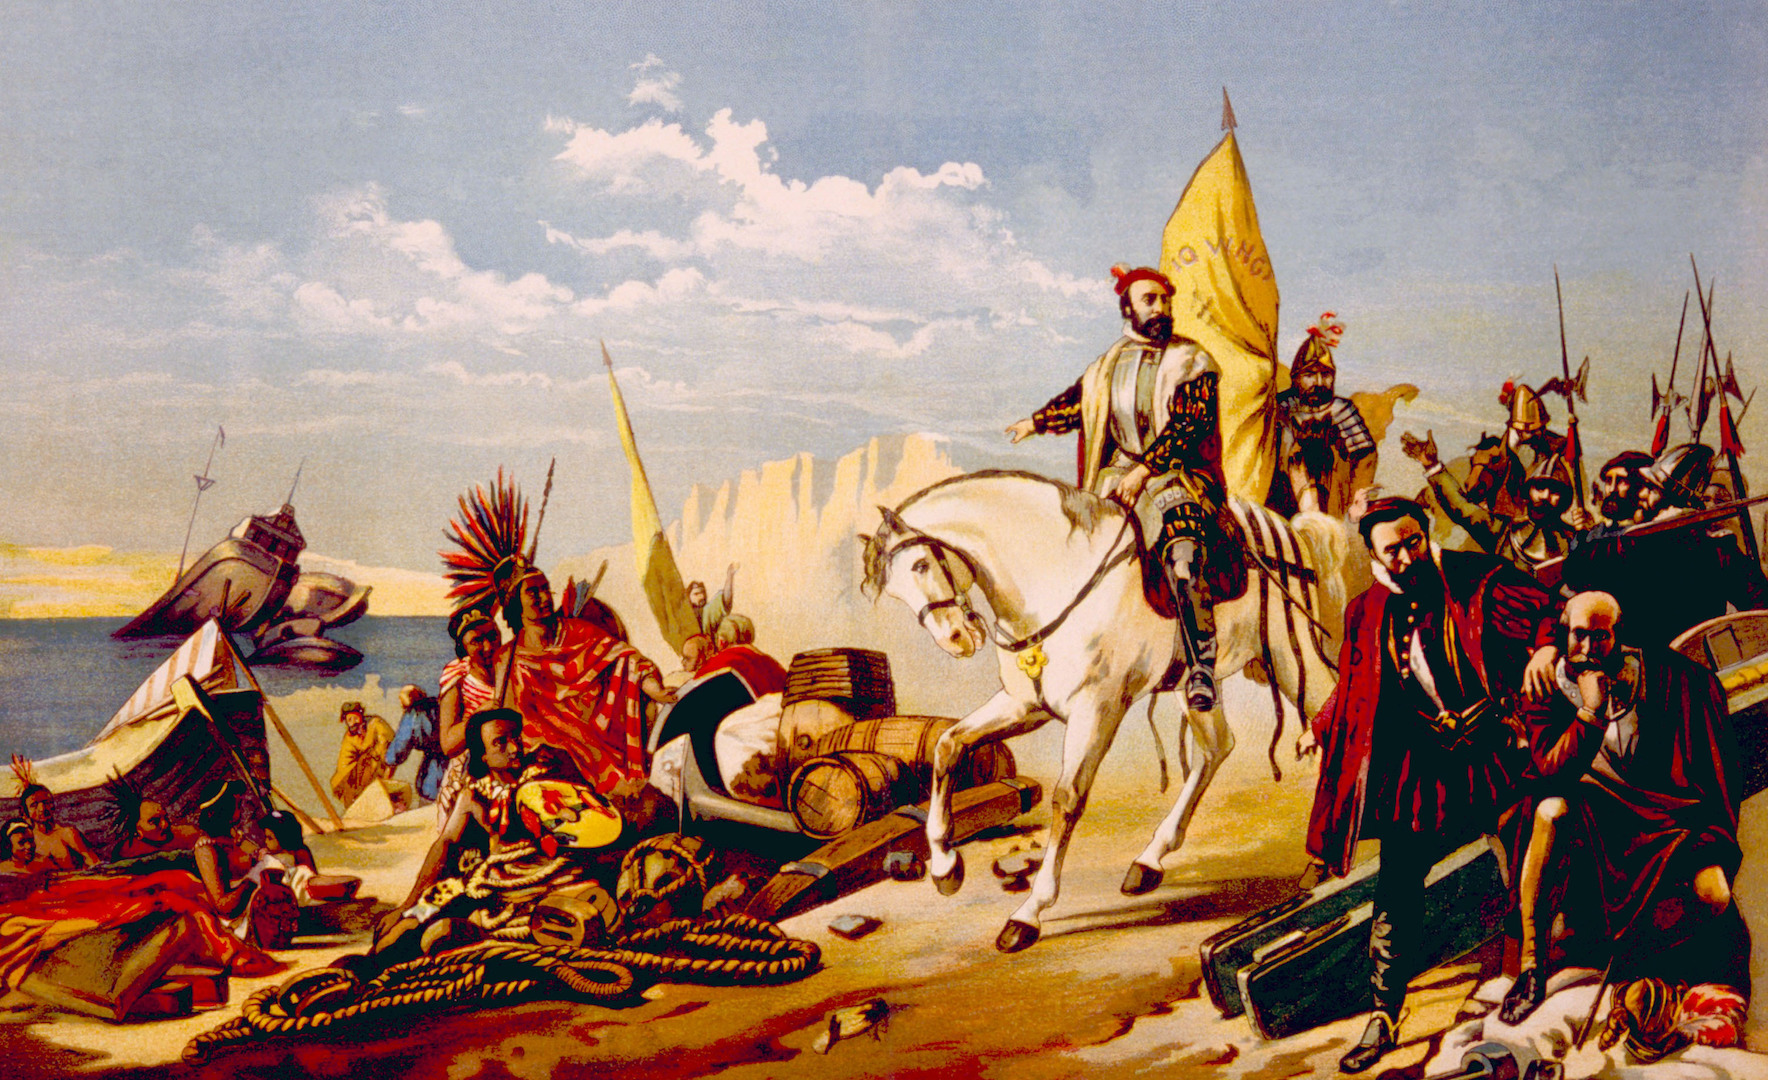 Painting by O. Graeff (1892) of Hernán Cortéz and his troops.